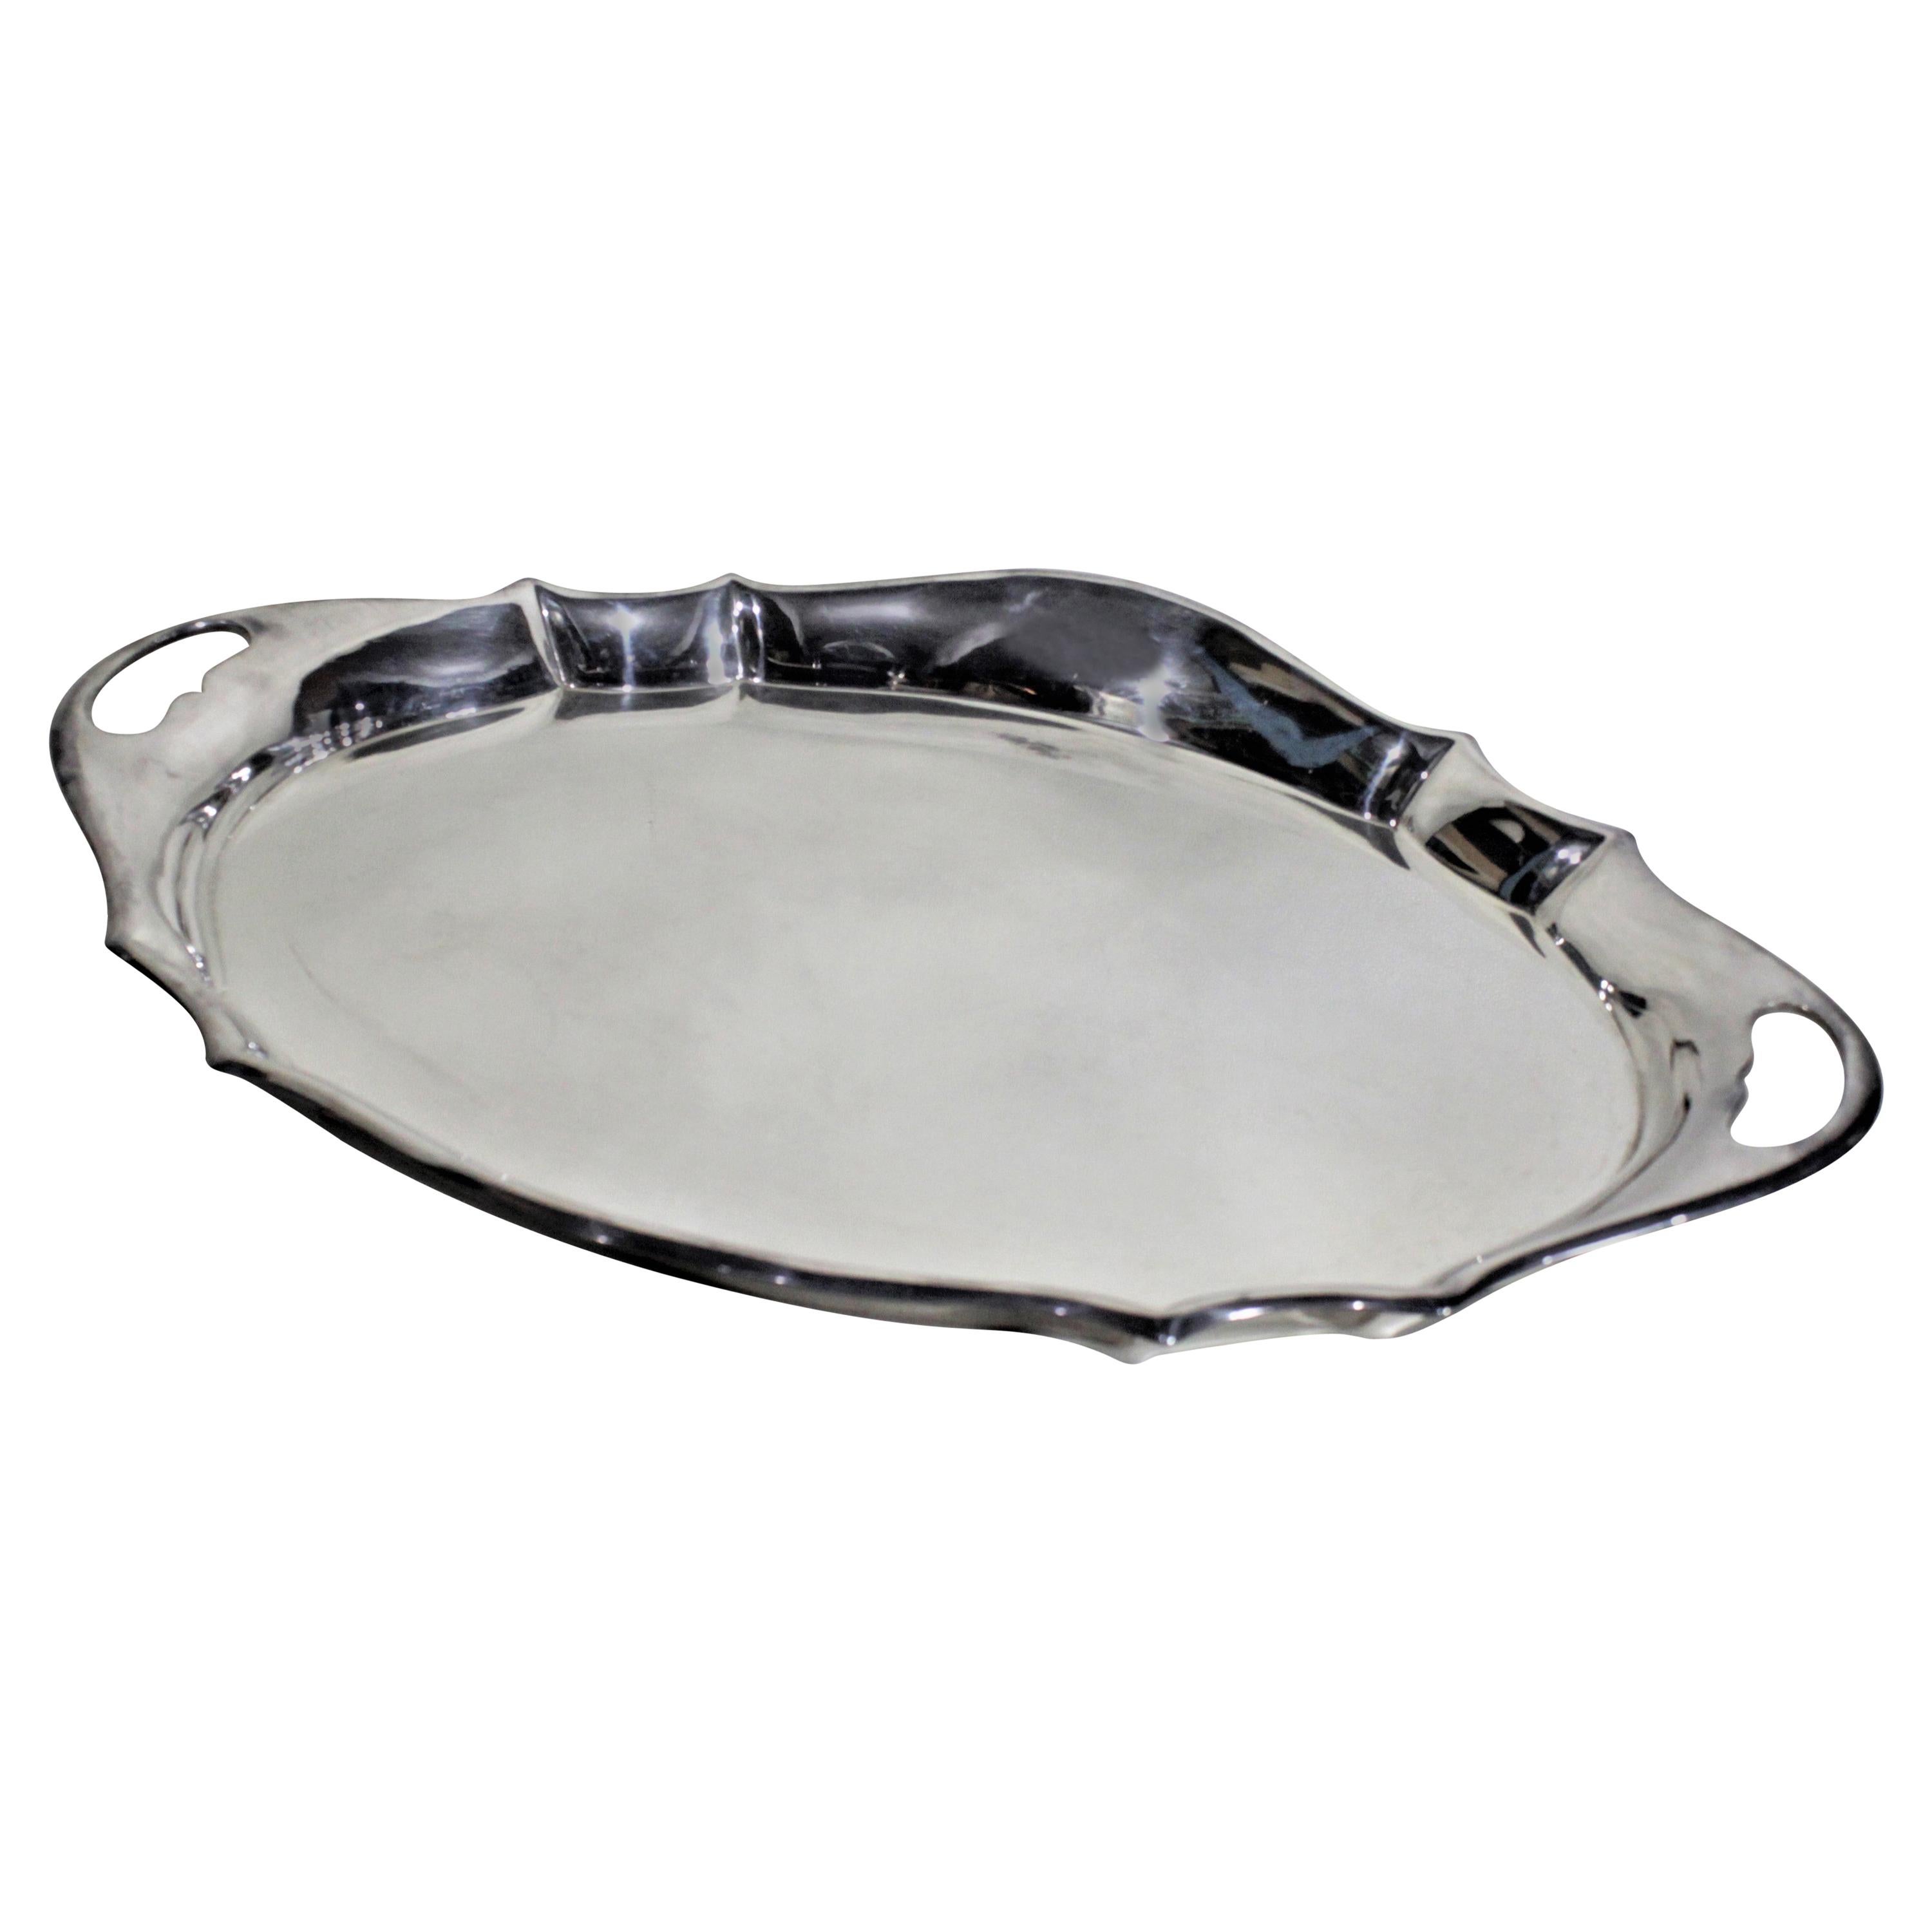 Antique Art Deco English Oval Silver Plated Serving Tray